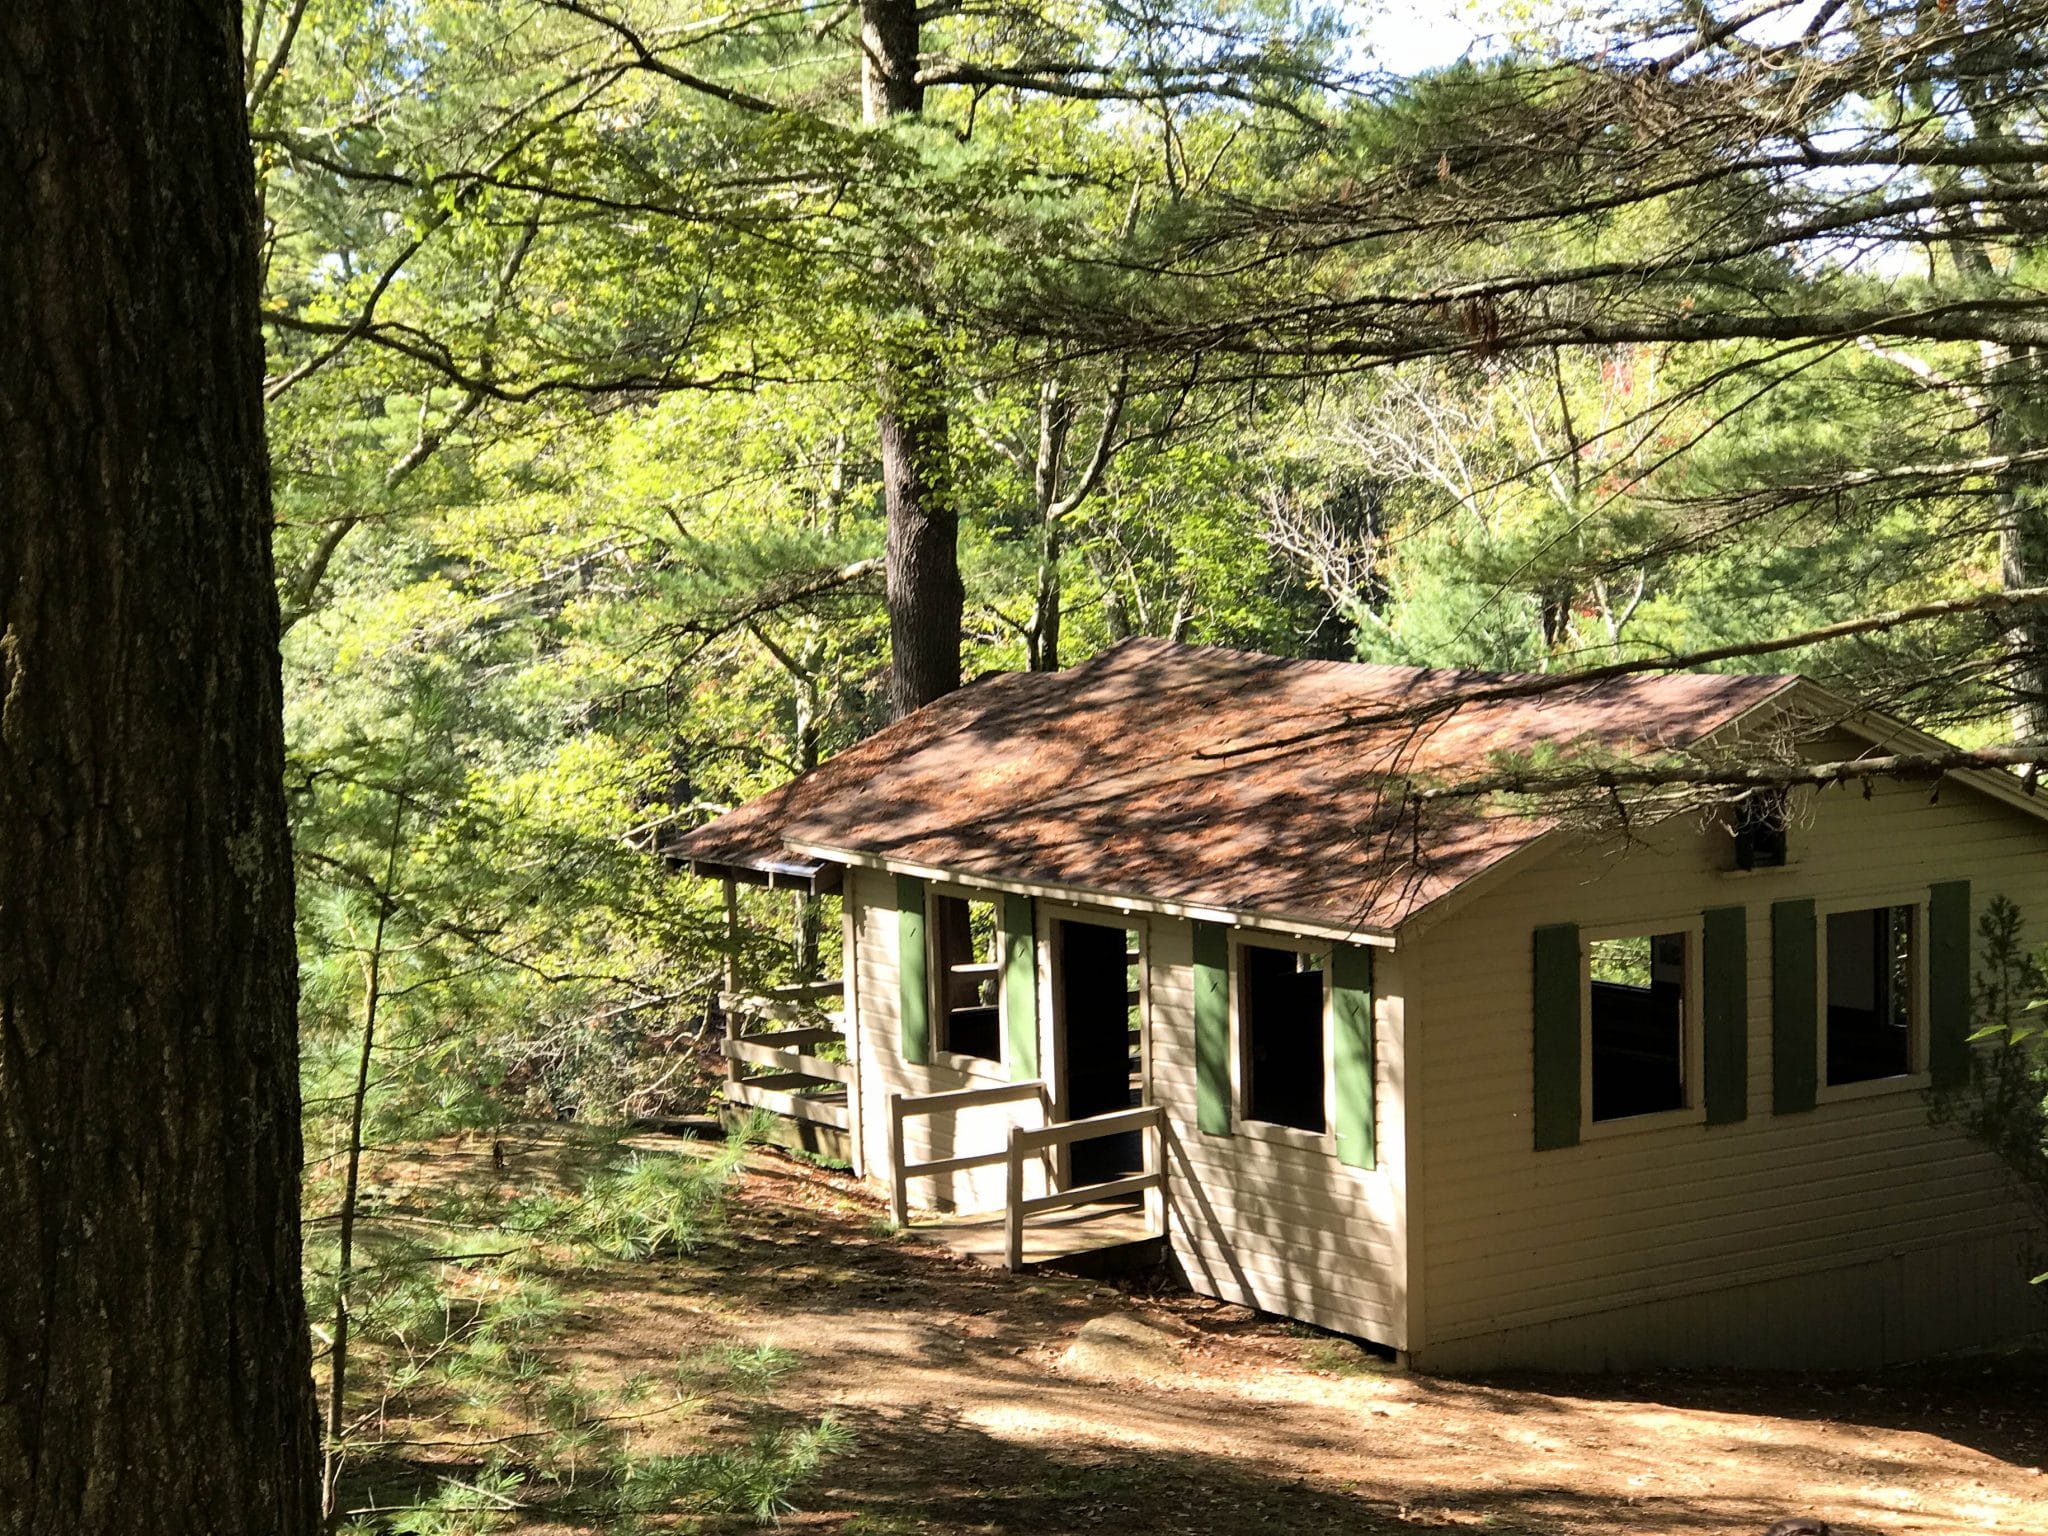 When hiking through Rock House Reservation, you'll come upon this cabin